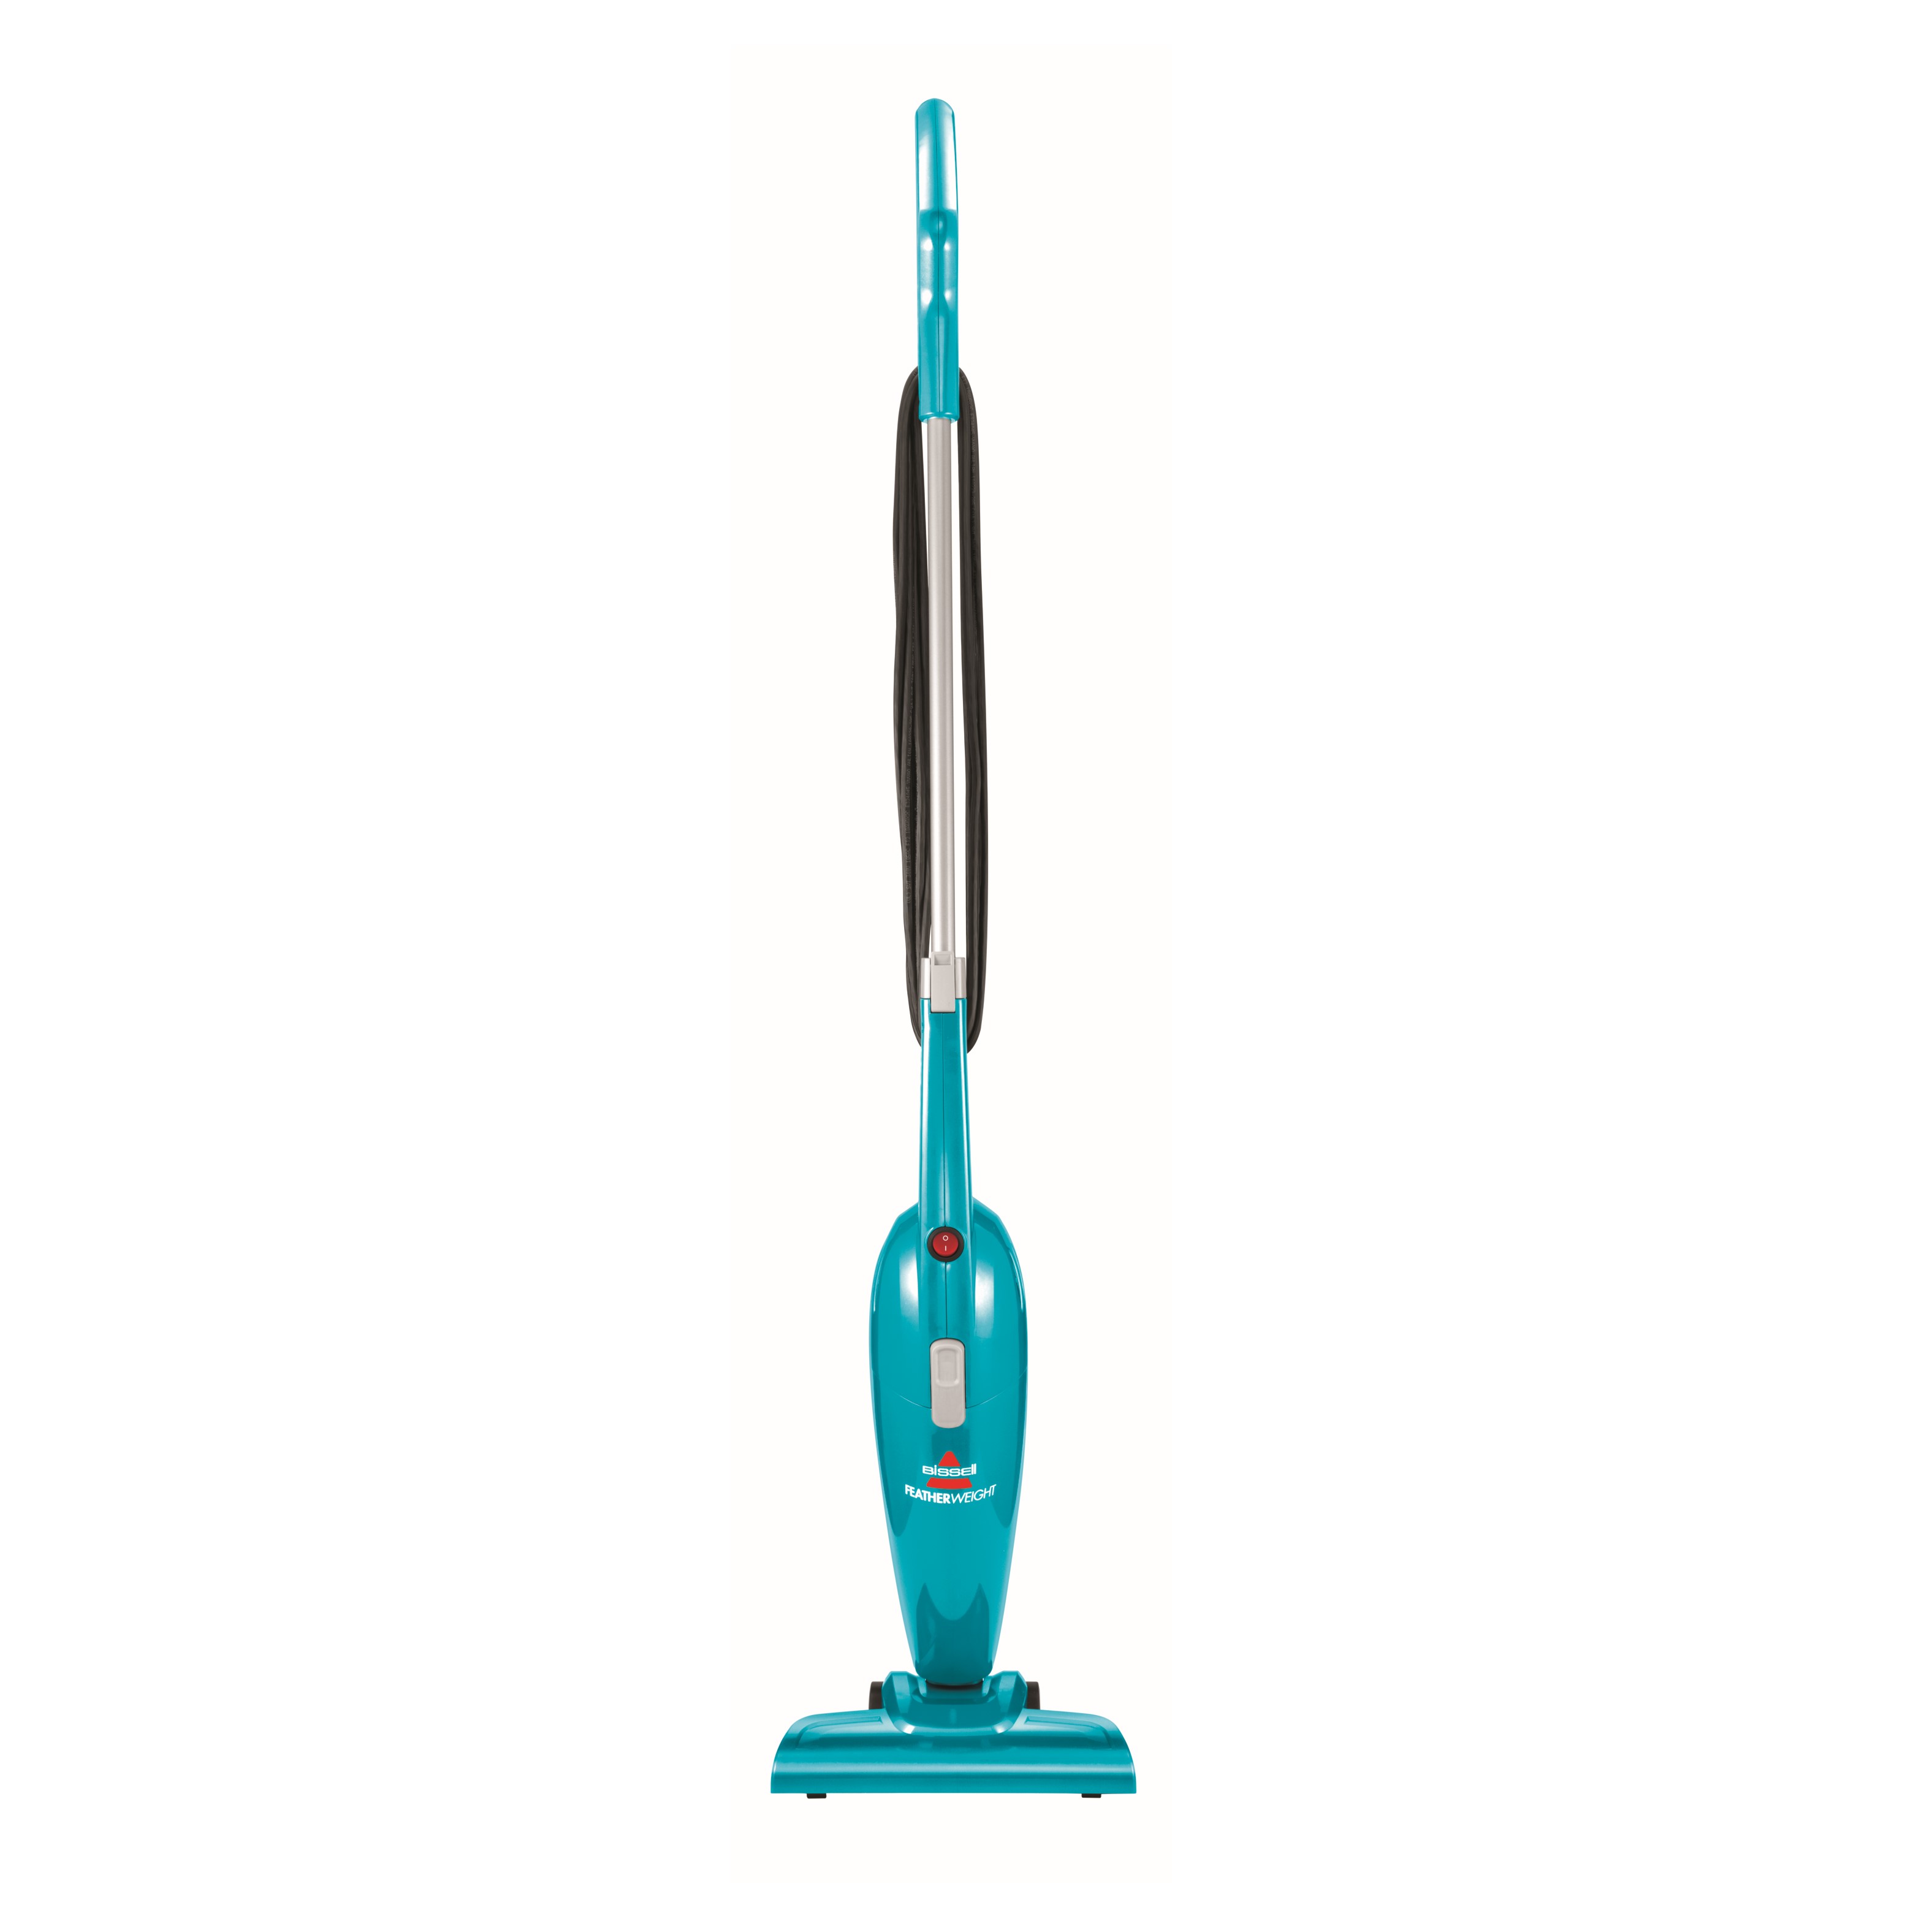 Bissell Featherweight Stick Lightweight Bagless Vacuum Vacuums & Electric Broom in Teal, BSL2033 - image 1 of 3